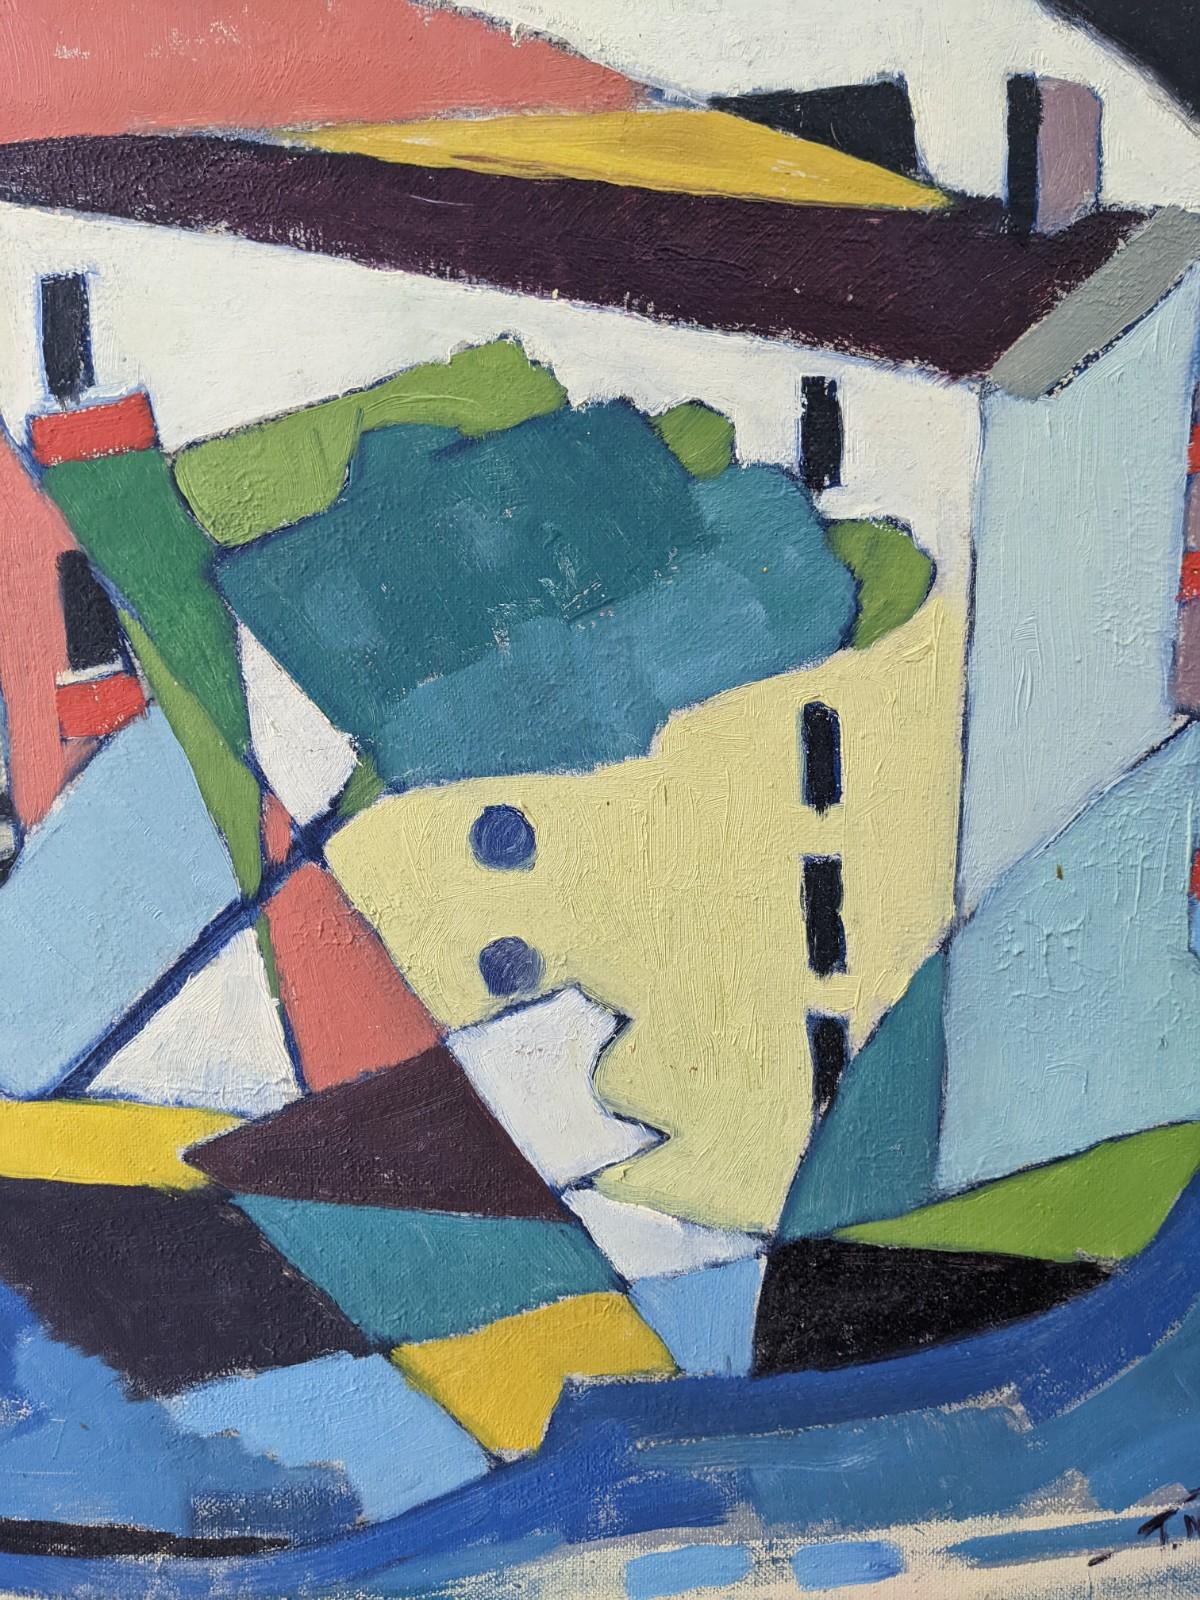 CUBIST HOUSE
Size: 61.5 x 71 cm (including frame)
Oil on board

A very interesting and striking mid century cubist oil composition, painted onto board.

With a focus on form, shape, line, pattern and colour, the artist has taken an interesting